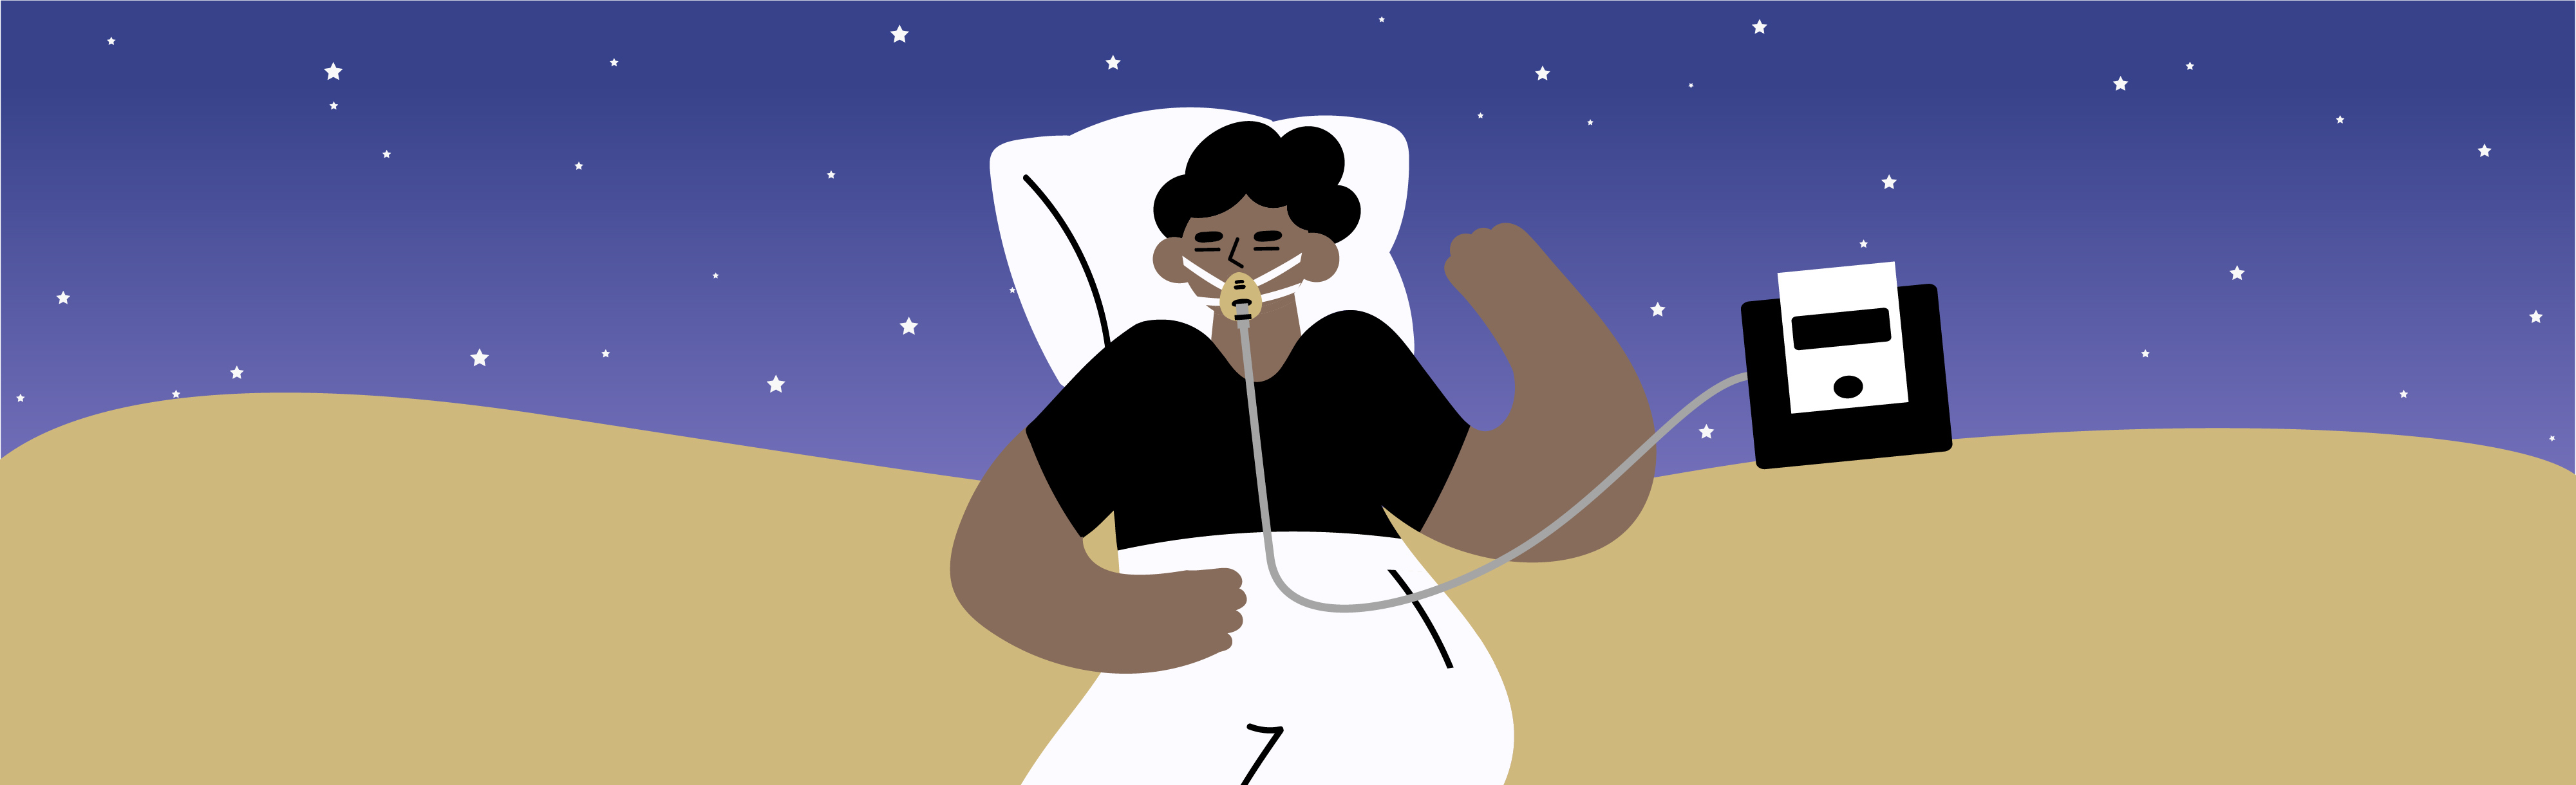 Graphic illustration of a person in bed with a CPAP mask, a star-filled sky in the background